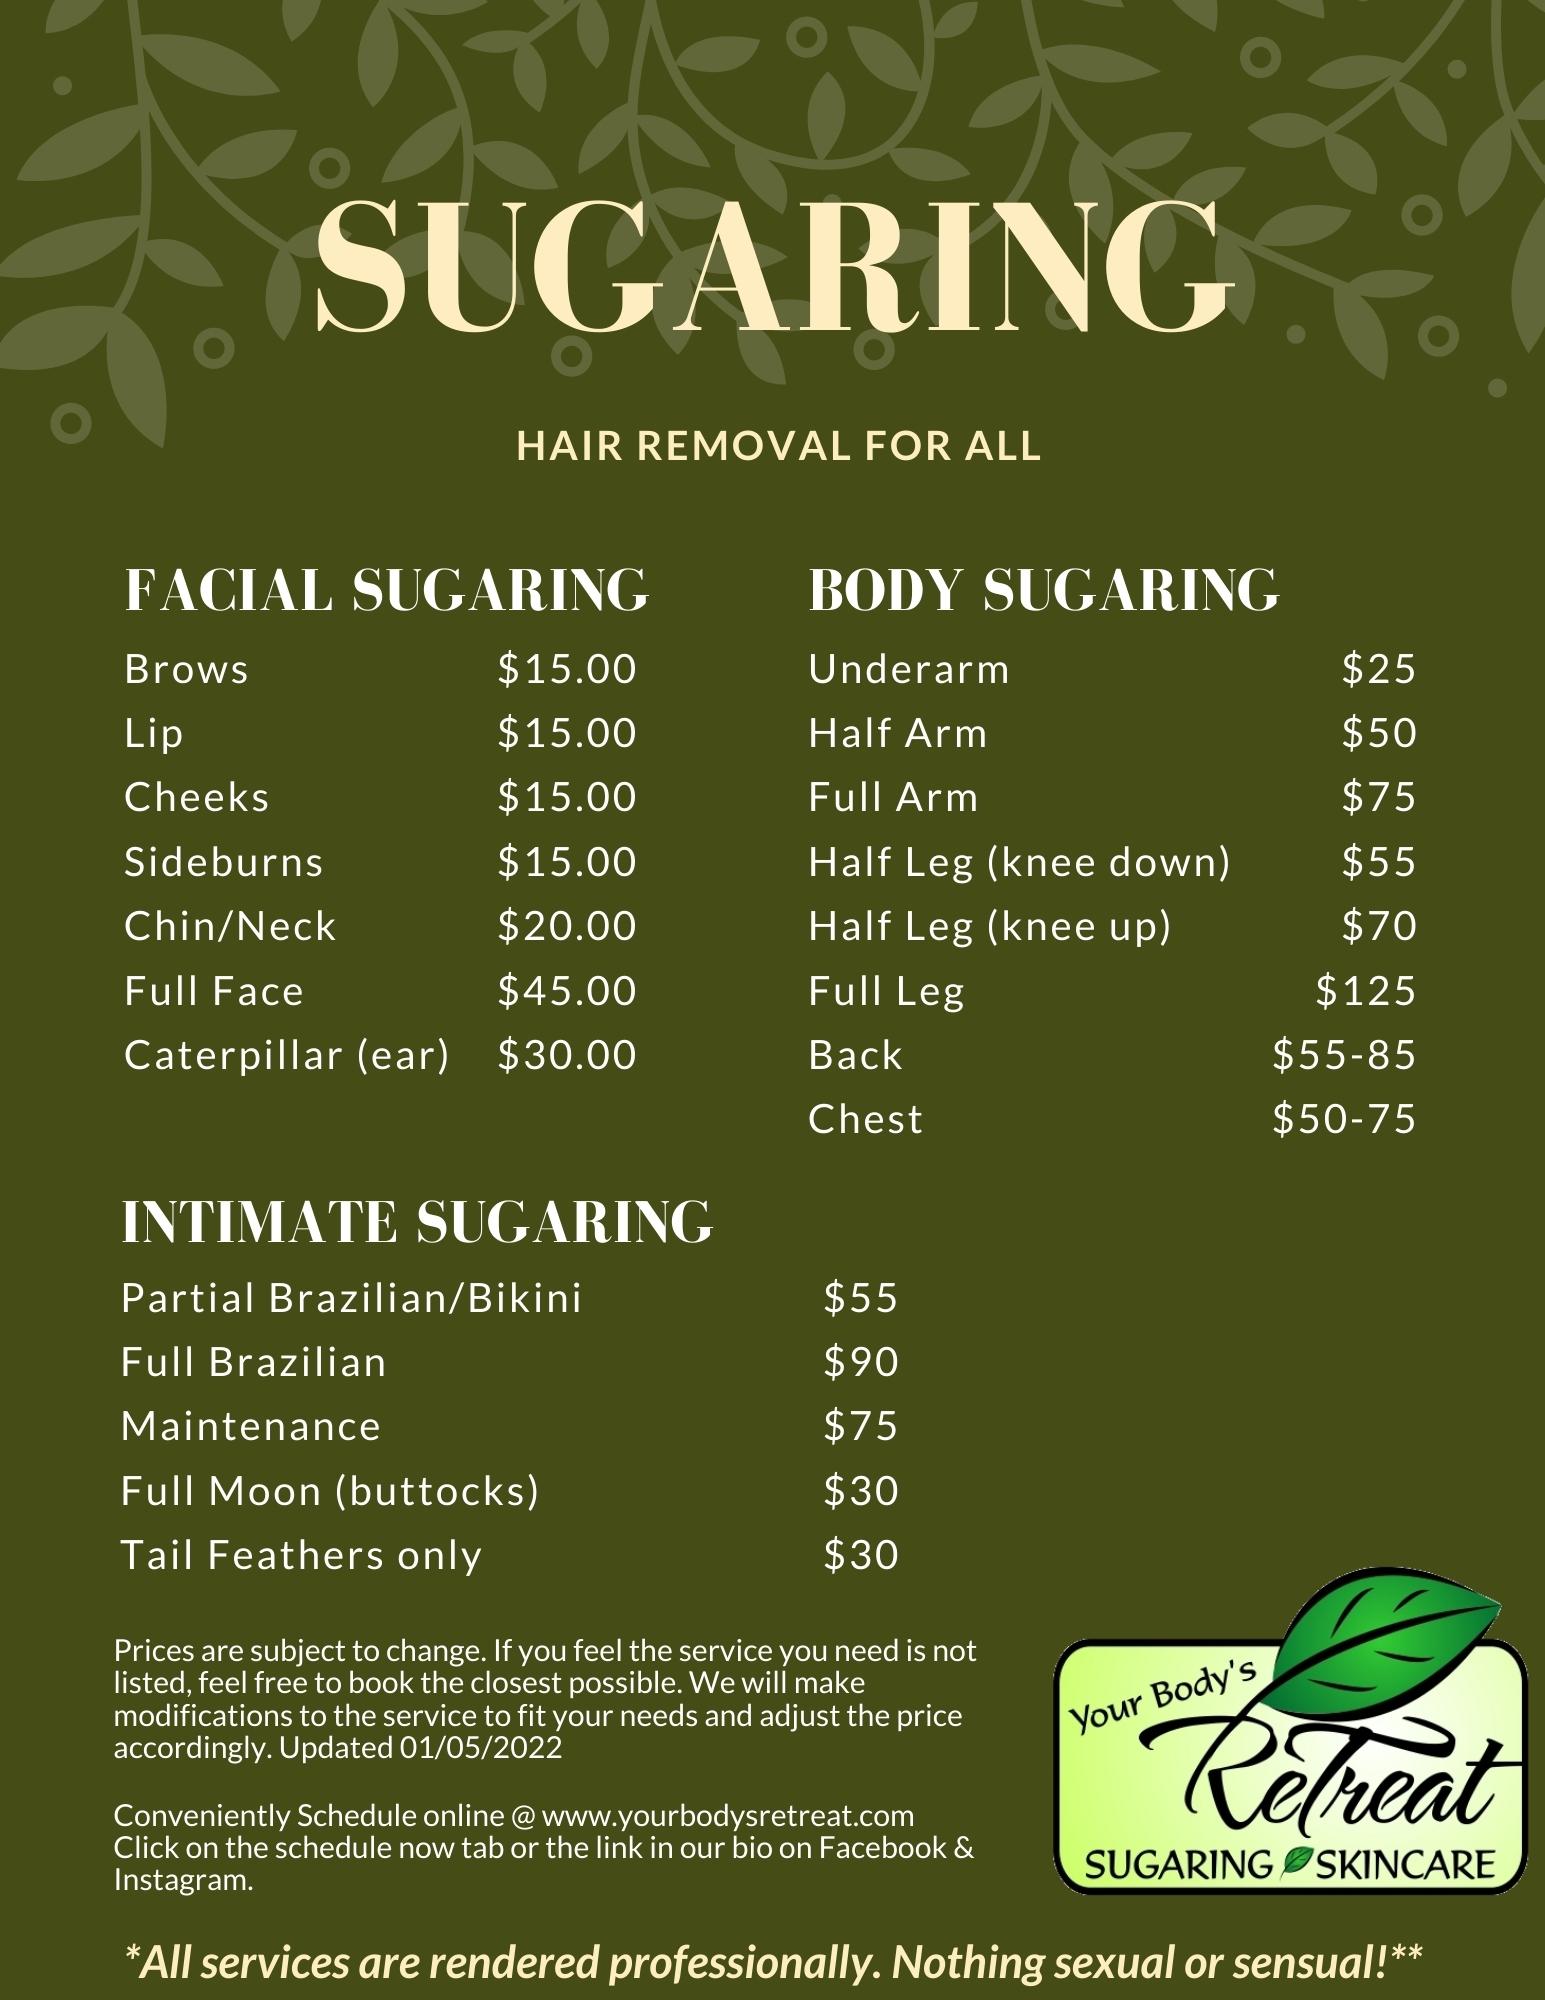 How Much Does Sugaring Cost? - Your Bodys ReTreat